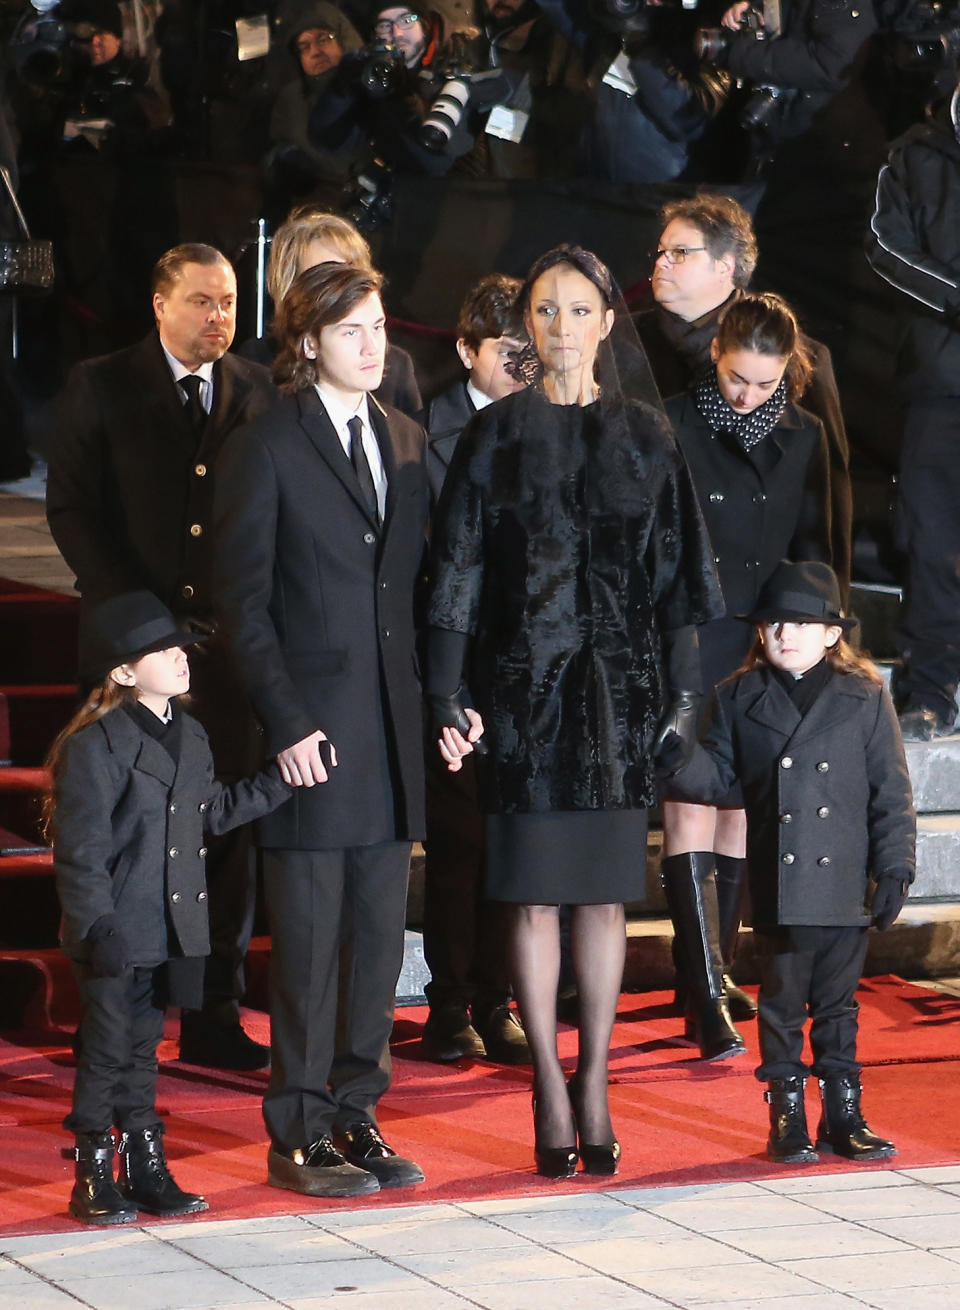 Recording artist Celine Dion and children Rene-Charles Angelil, Eddy Angelil and Nelson Angelil attend the State Funeral Service for Celine Dion's Husband Rene Angelil